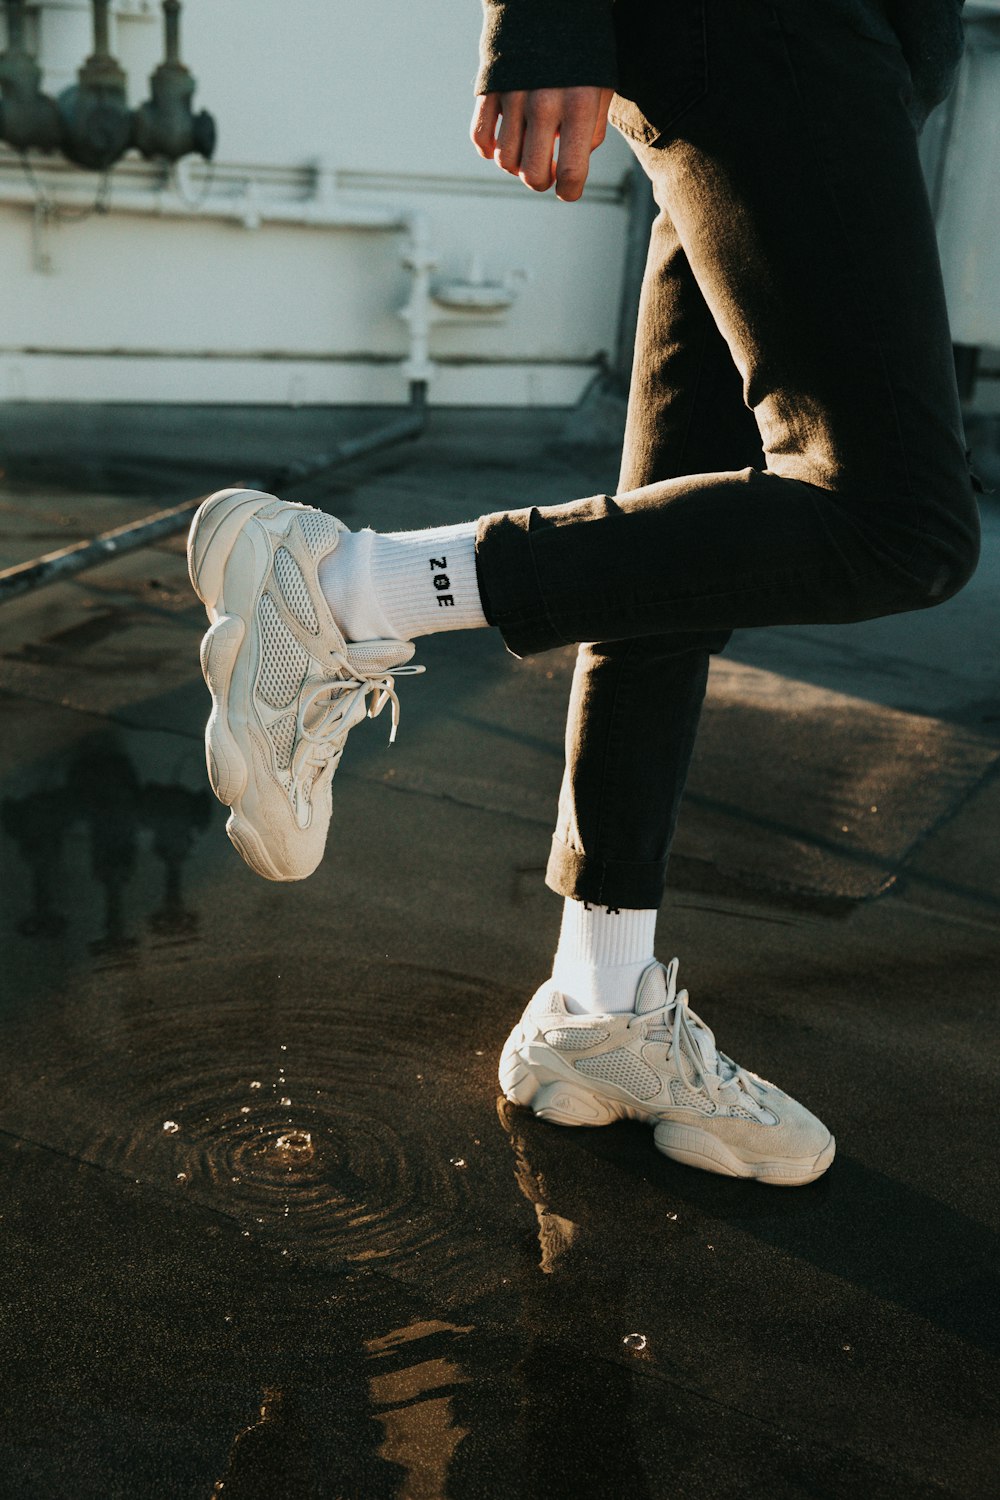 discolor skyde røveri person wearing black pants, white socks, and low-top sneakers photo – Free  Style Image on Unsplash